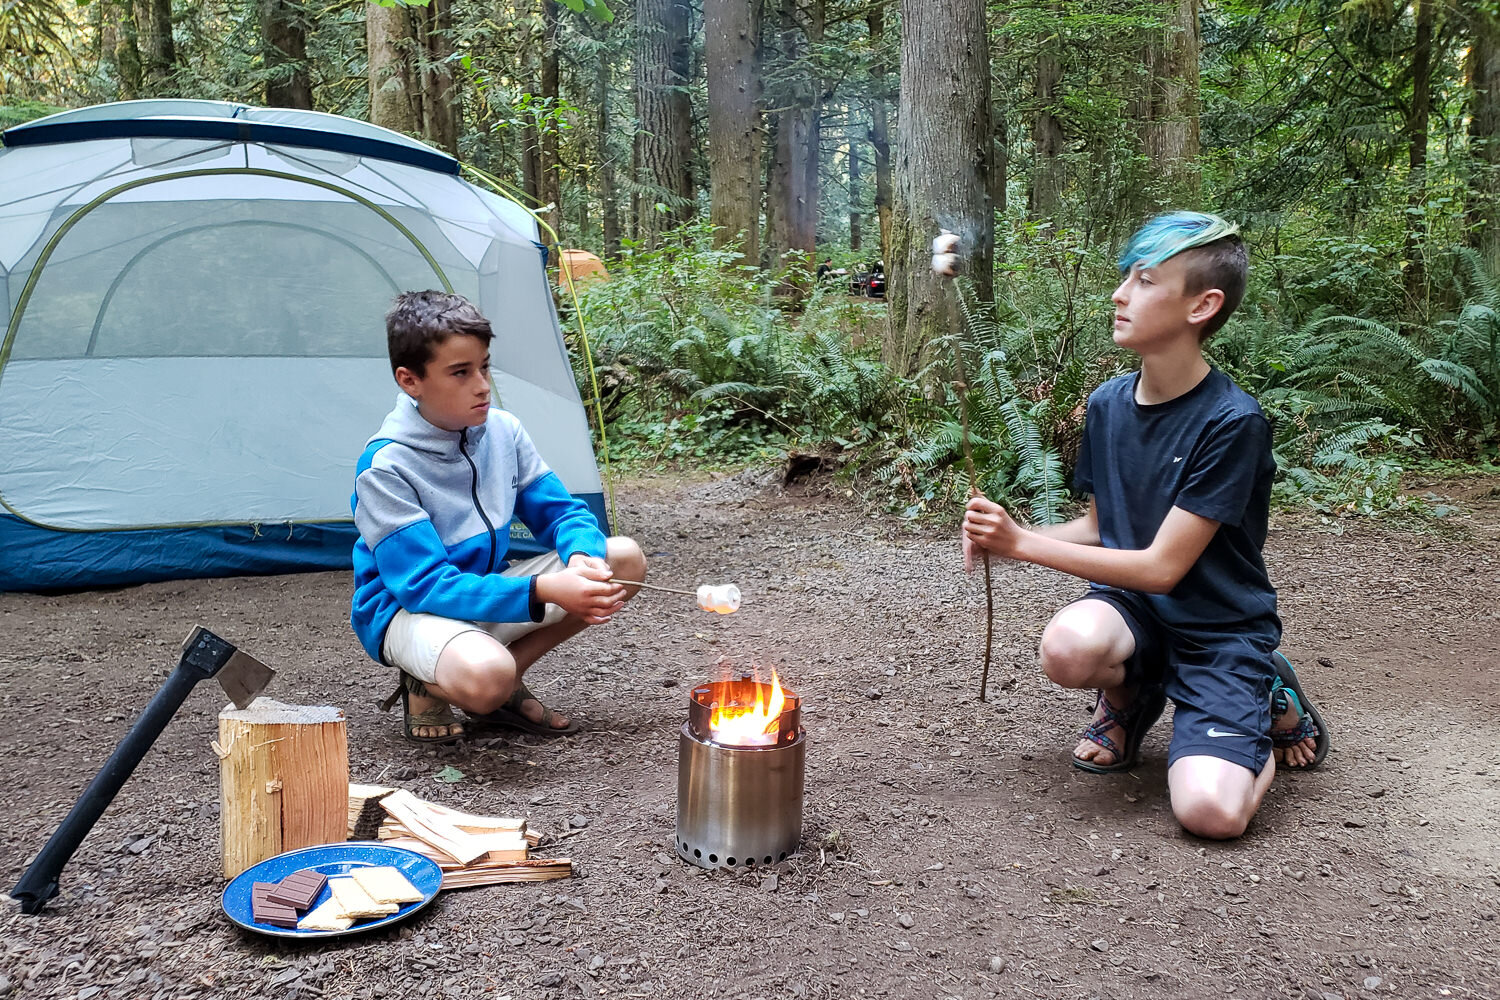 The Solo Stove Campfire is great for entertainment and camp cooking